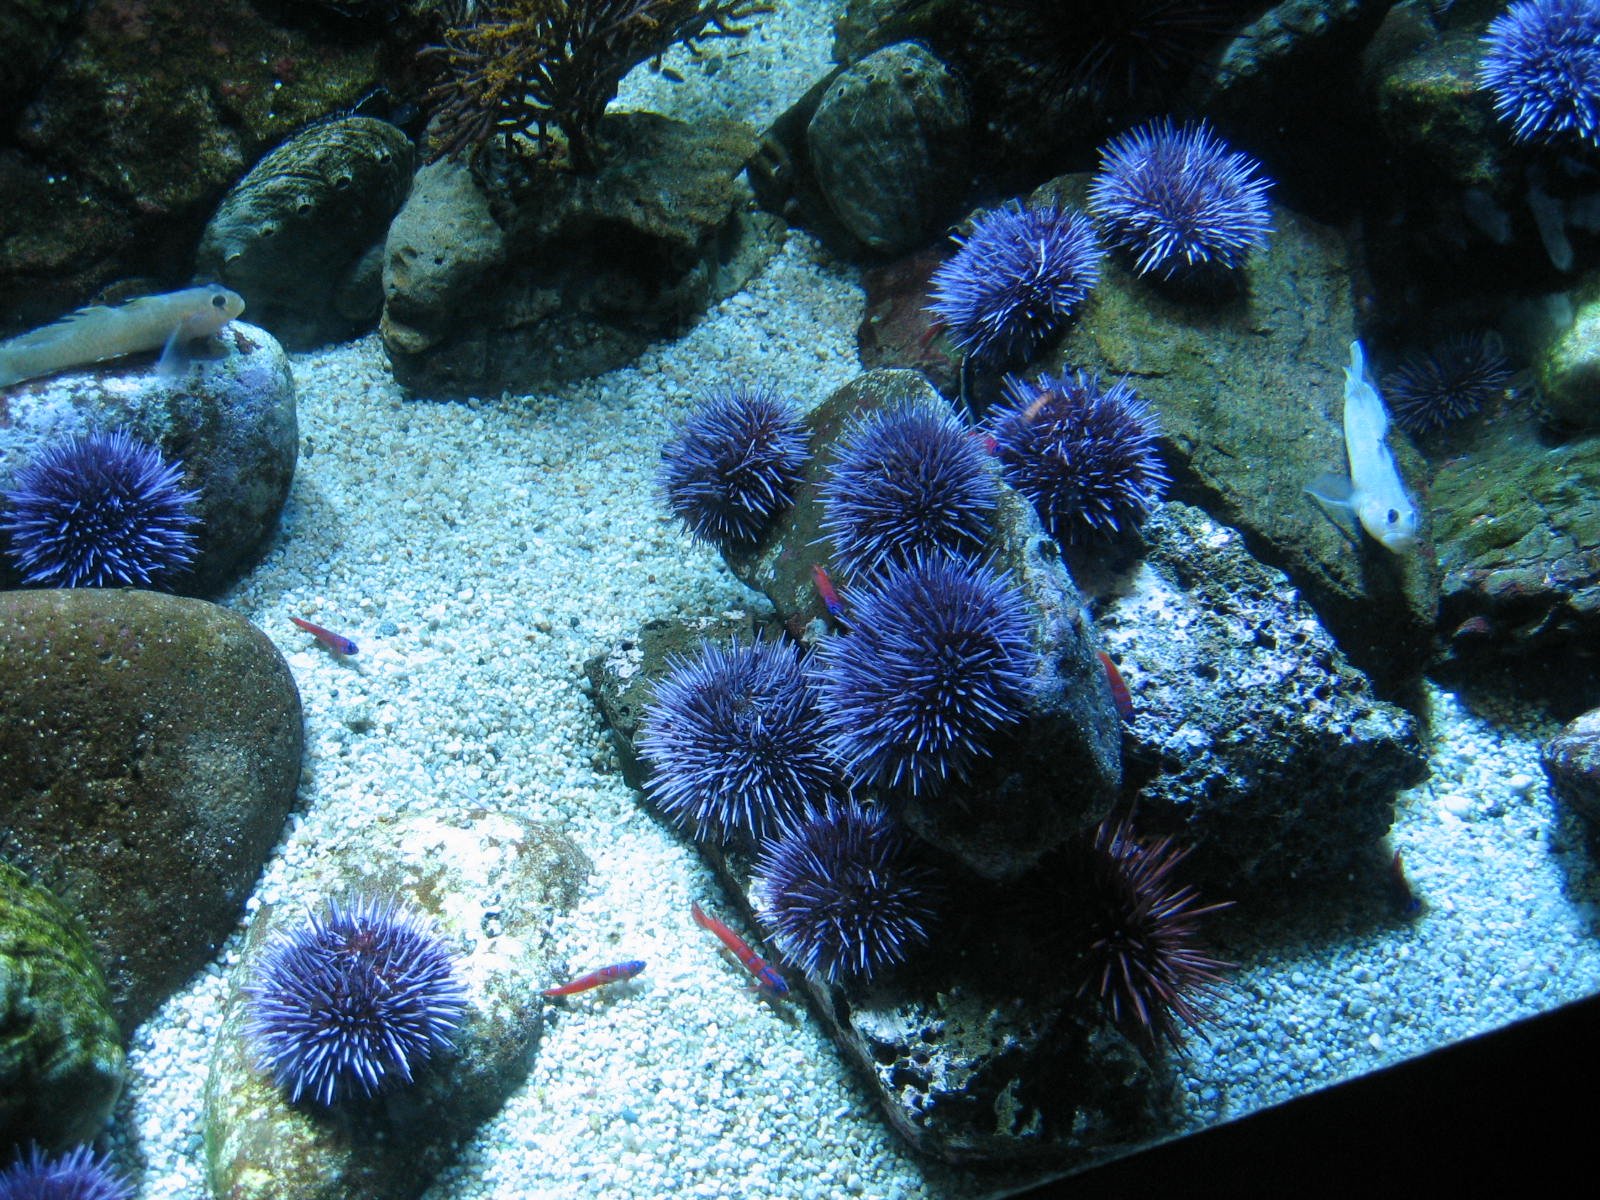 a sea urchin underwater among rocks and pebbles